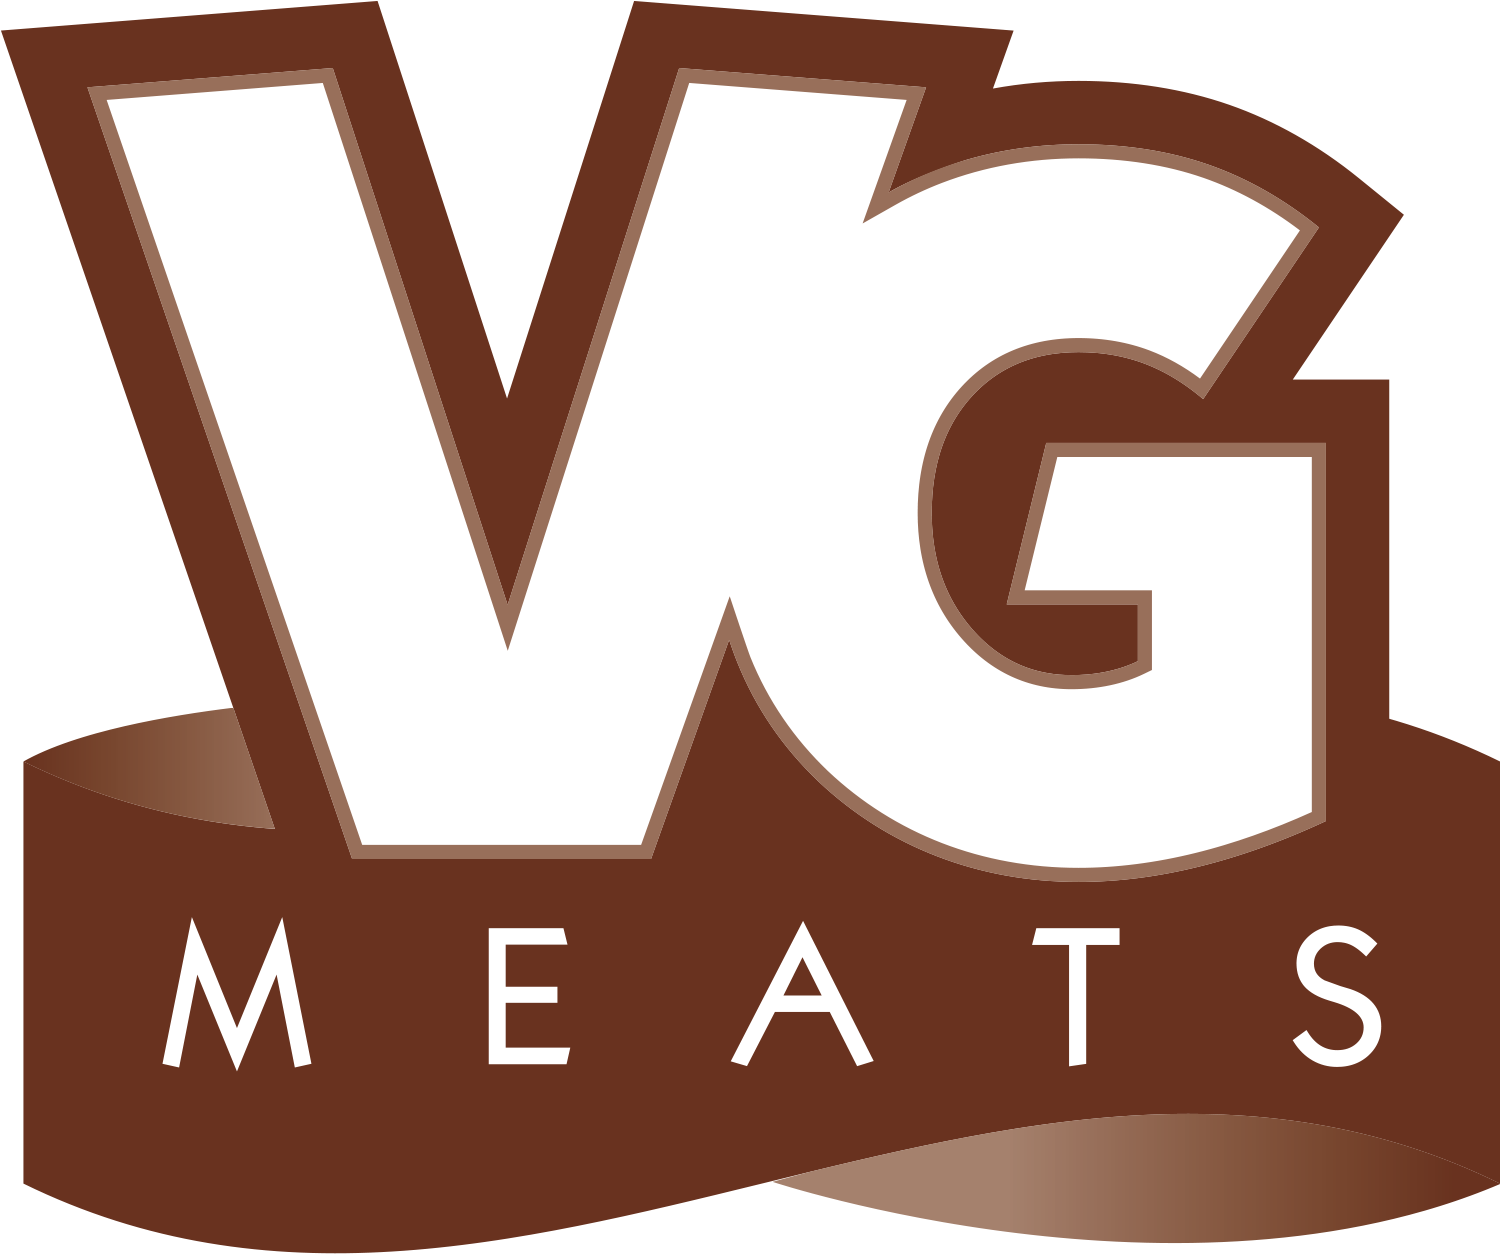 Search Result Vg Meats - Vg Meats (1499x1424)